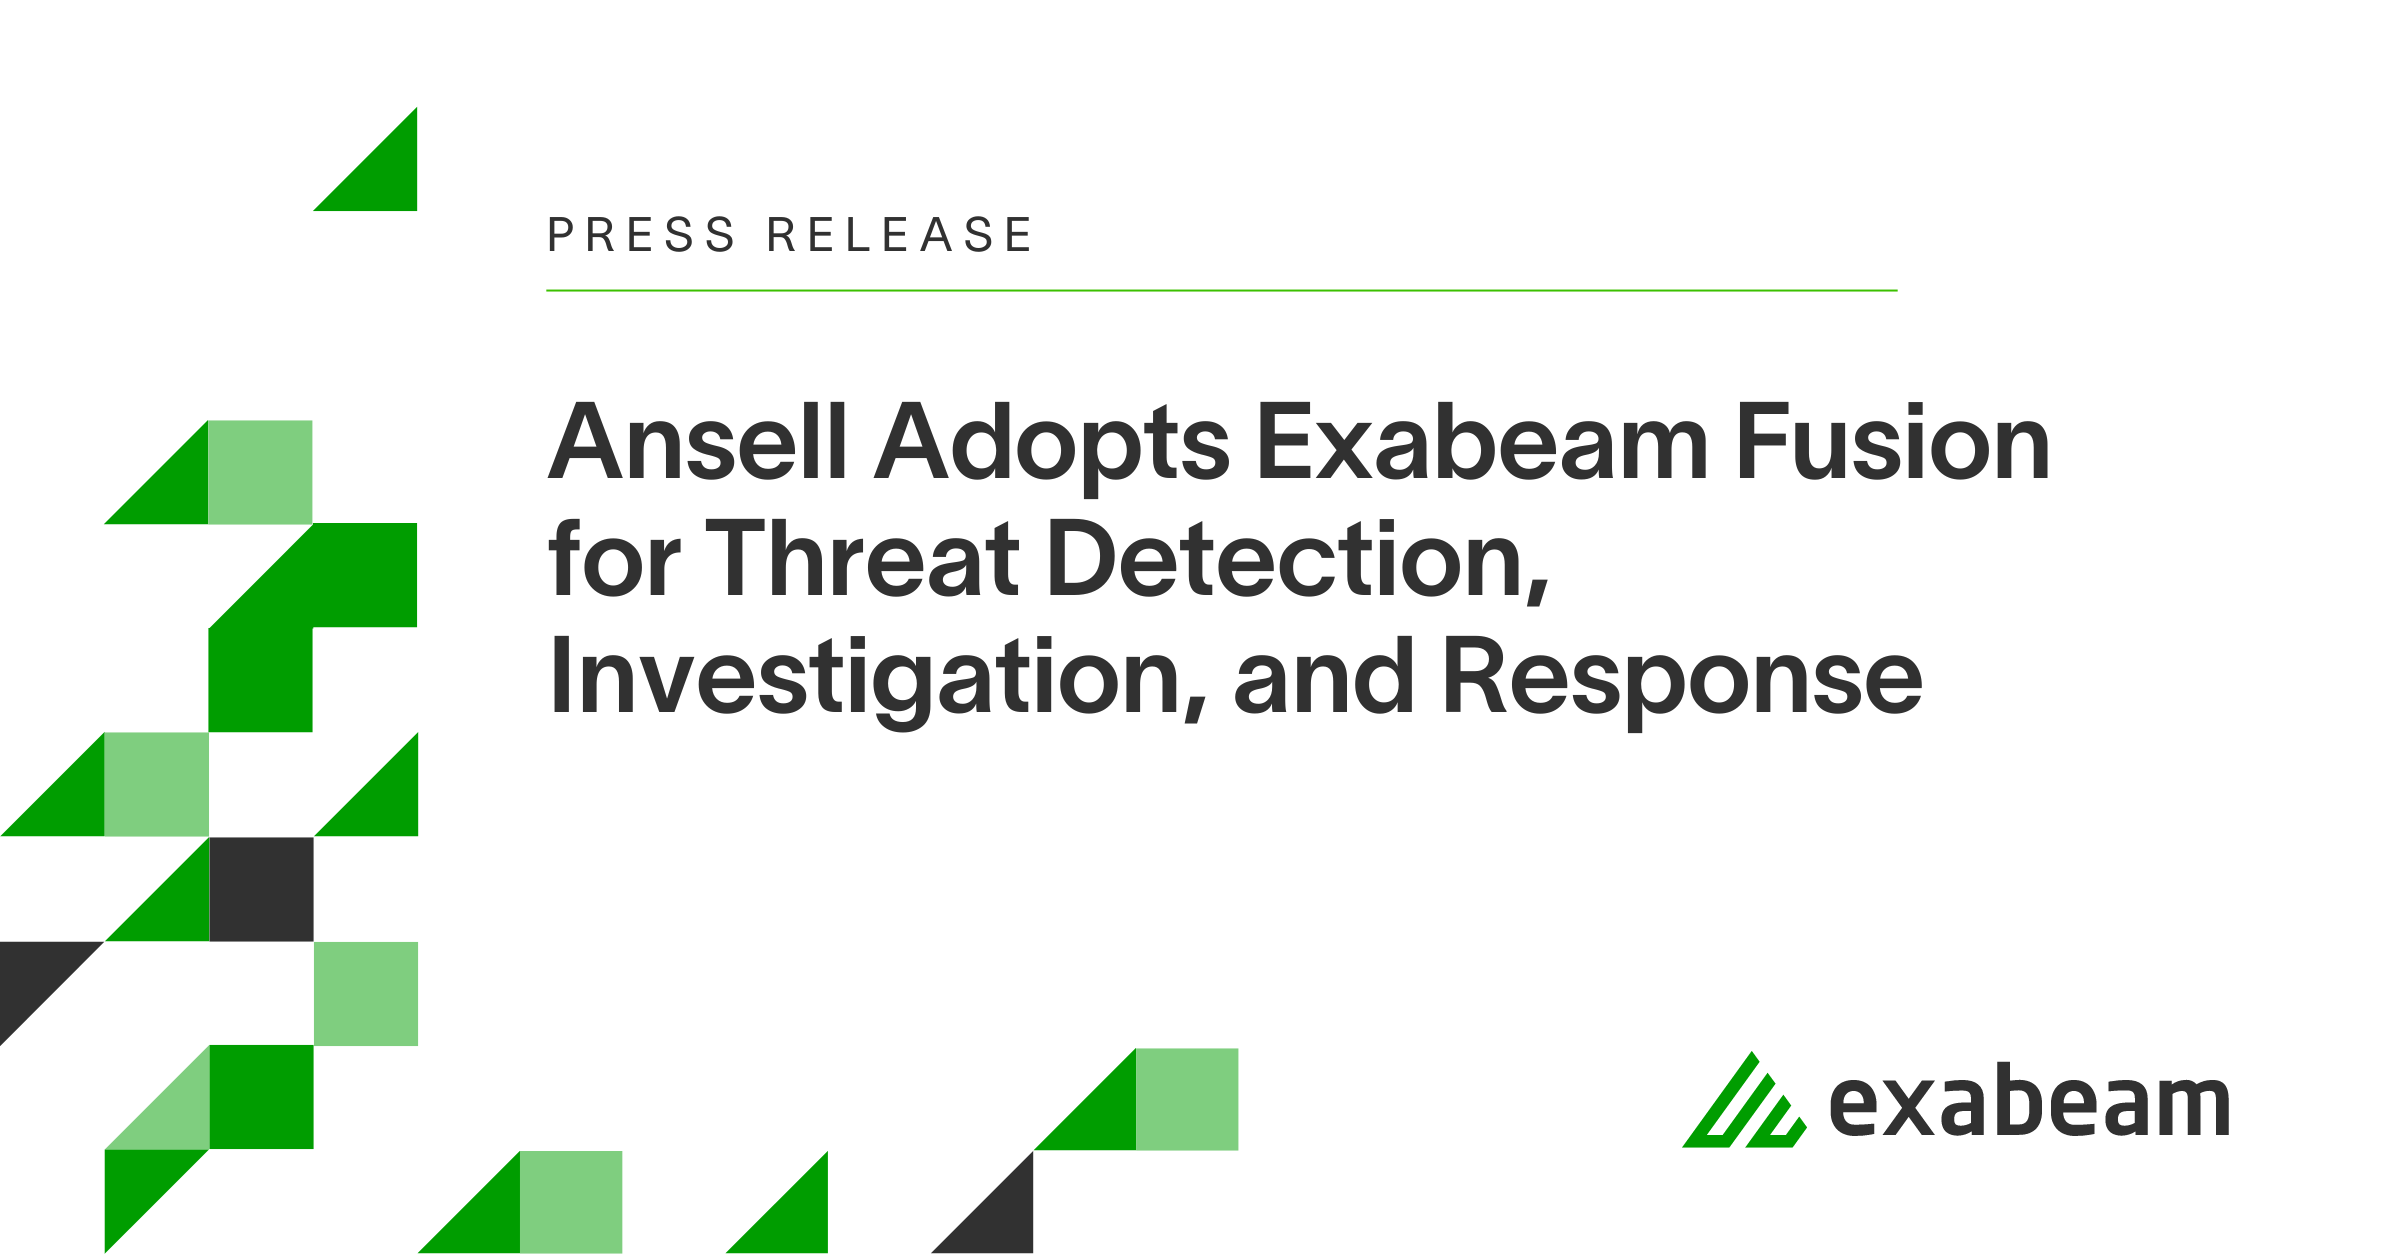 Ansell Adopts Exabeam Fusion for Threat Detection, Investigation, and Response